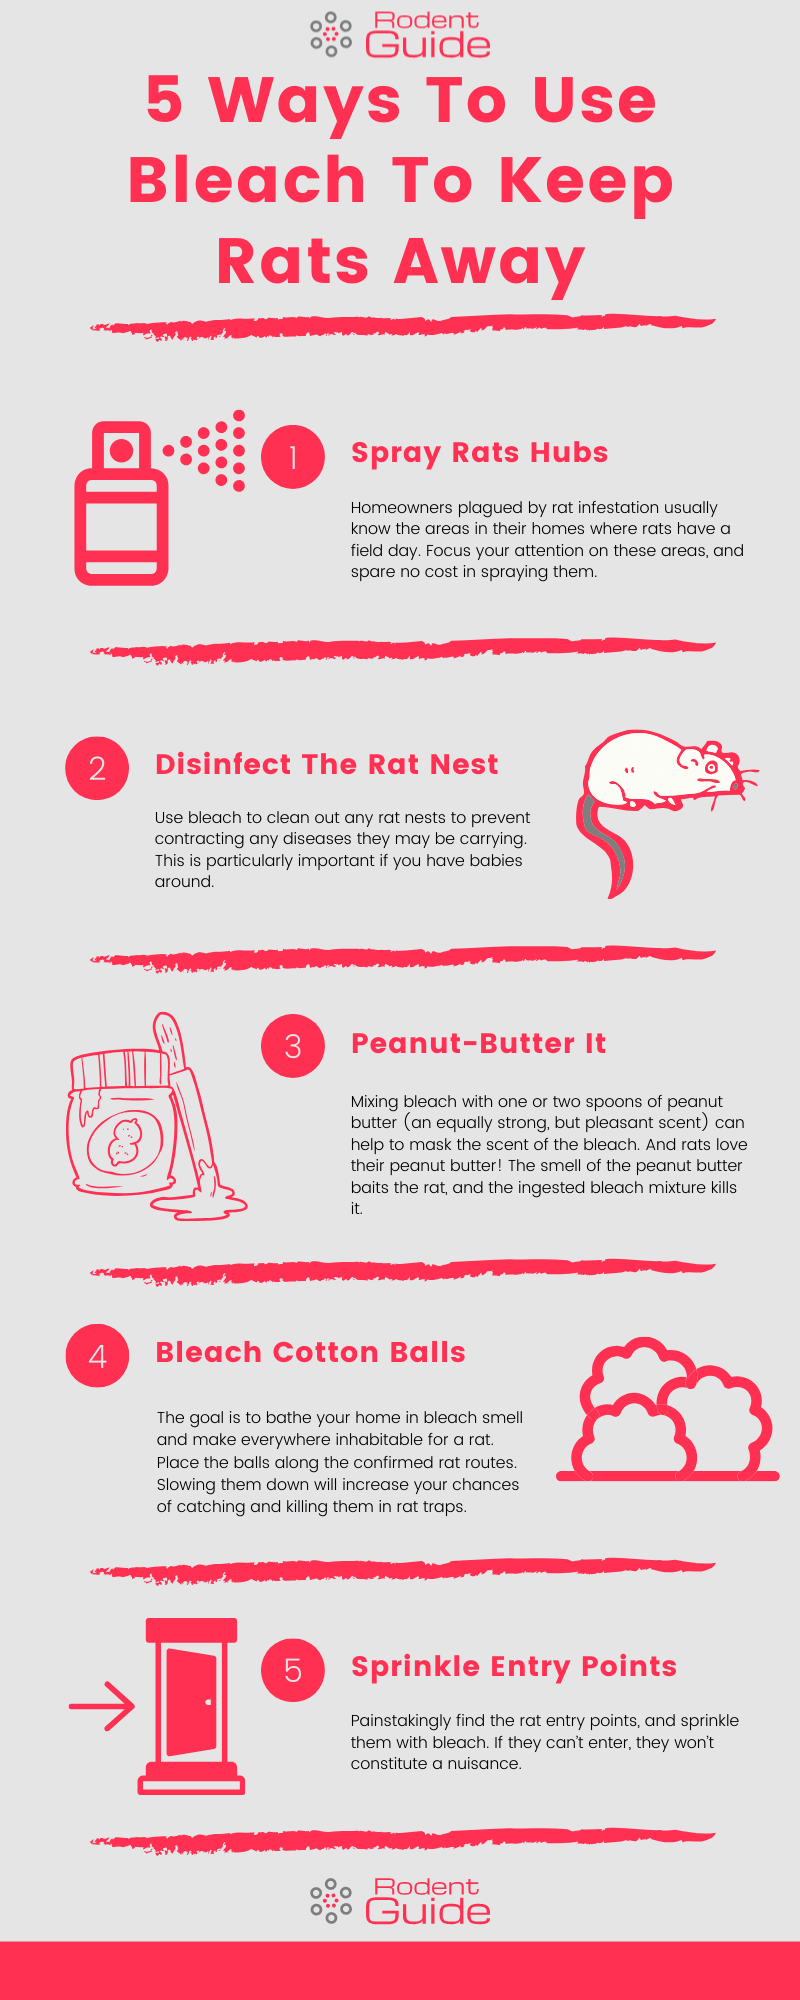 5 Ways To Use Bleach To Keep Rats Away Infographic